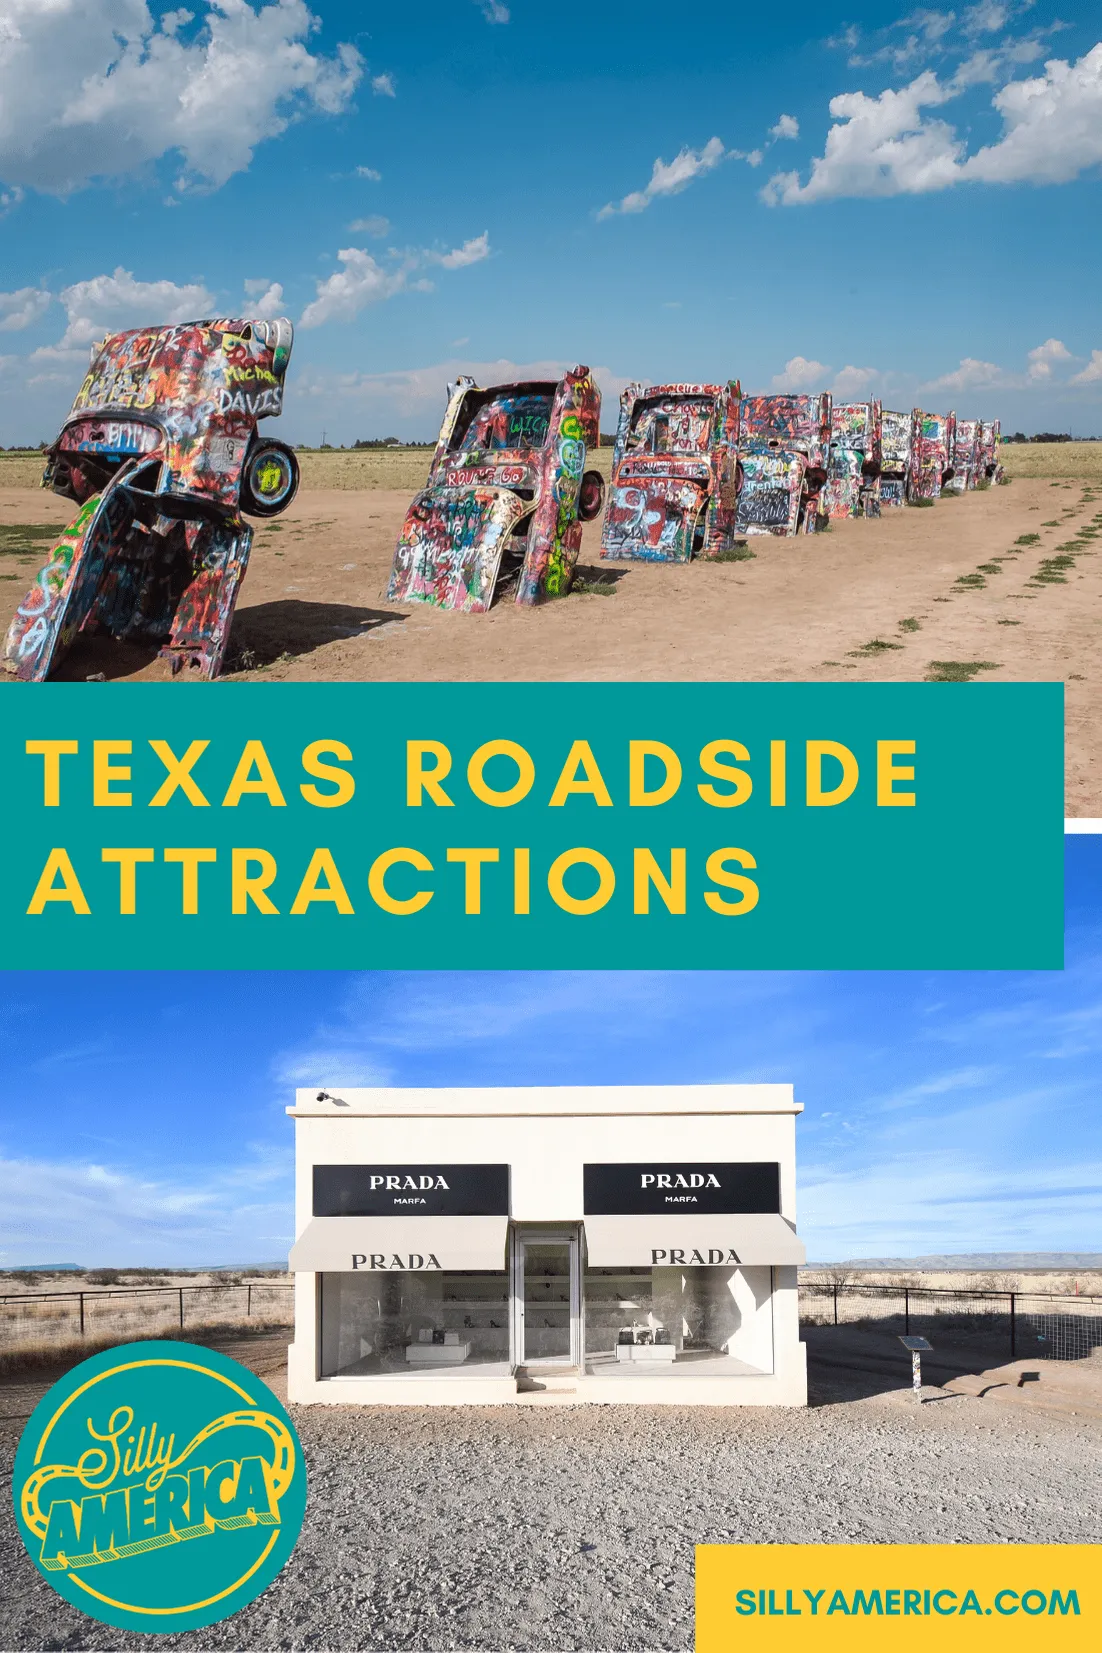 The best Texas roadside attractions to visit on a Texas road trip. Add these roadside oddities to your travel bucket list, itinerary, or route map! Fun road trip stops for kids and adults on Route 66 and beyond. #TexasRoadsideAttractions #TexasRoadsideAttraction #RoadsideAttractions #RoadsideAttraction #RoadTrip #TexasRoadTrip #TexasRoadTripMap #TexasRoadTripBucketLists #TexasBucketList #TexasRoadTripIdeas #TexasWeekendGetaways #TexasRoadTripWithKids #TexasRoadTripItinerary